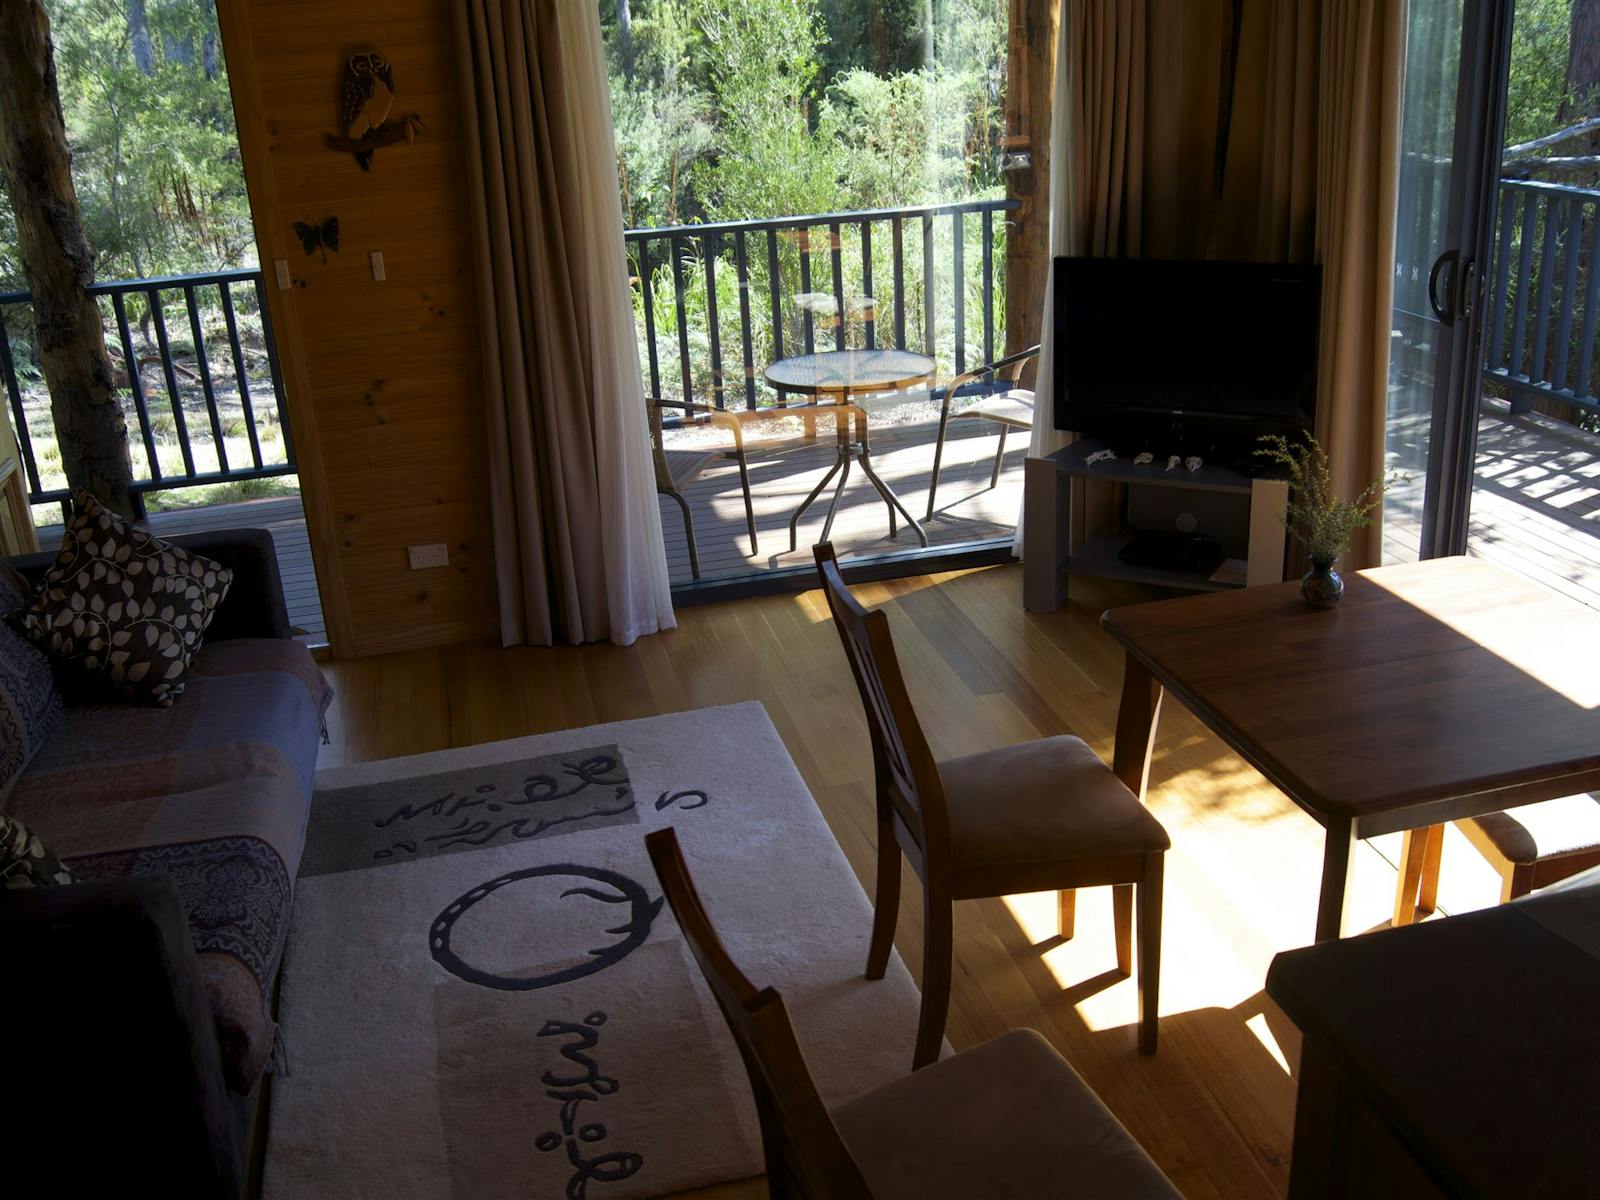 Nairana cottage offers opportunities to watch birds and wallabies from the comfort of indoors.